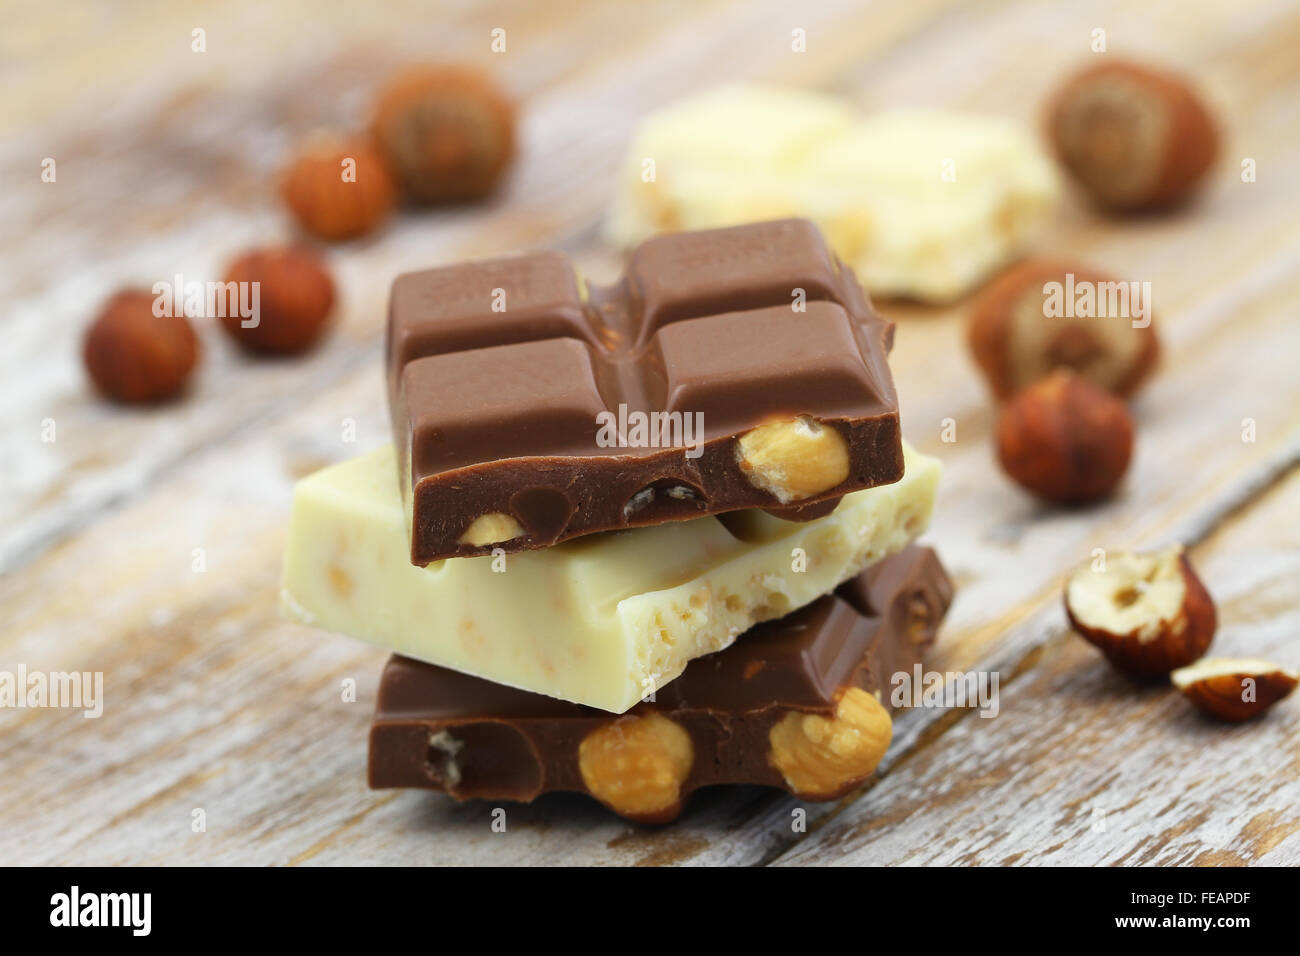 Milk and white chocolate pieces with whole hazelnuts stacked up on wooden surface Stock Photo